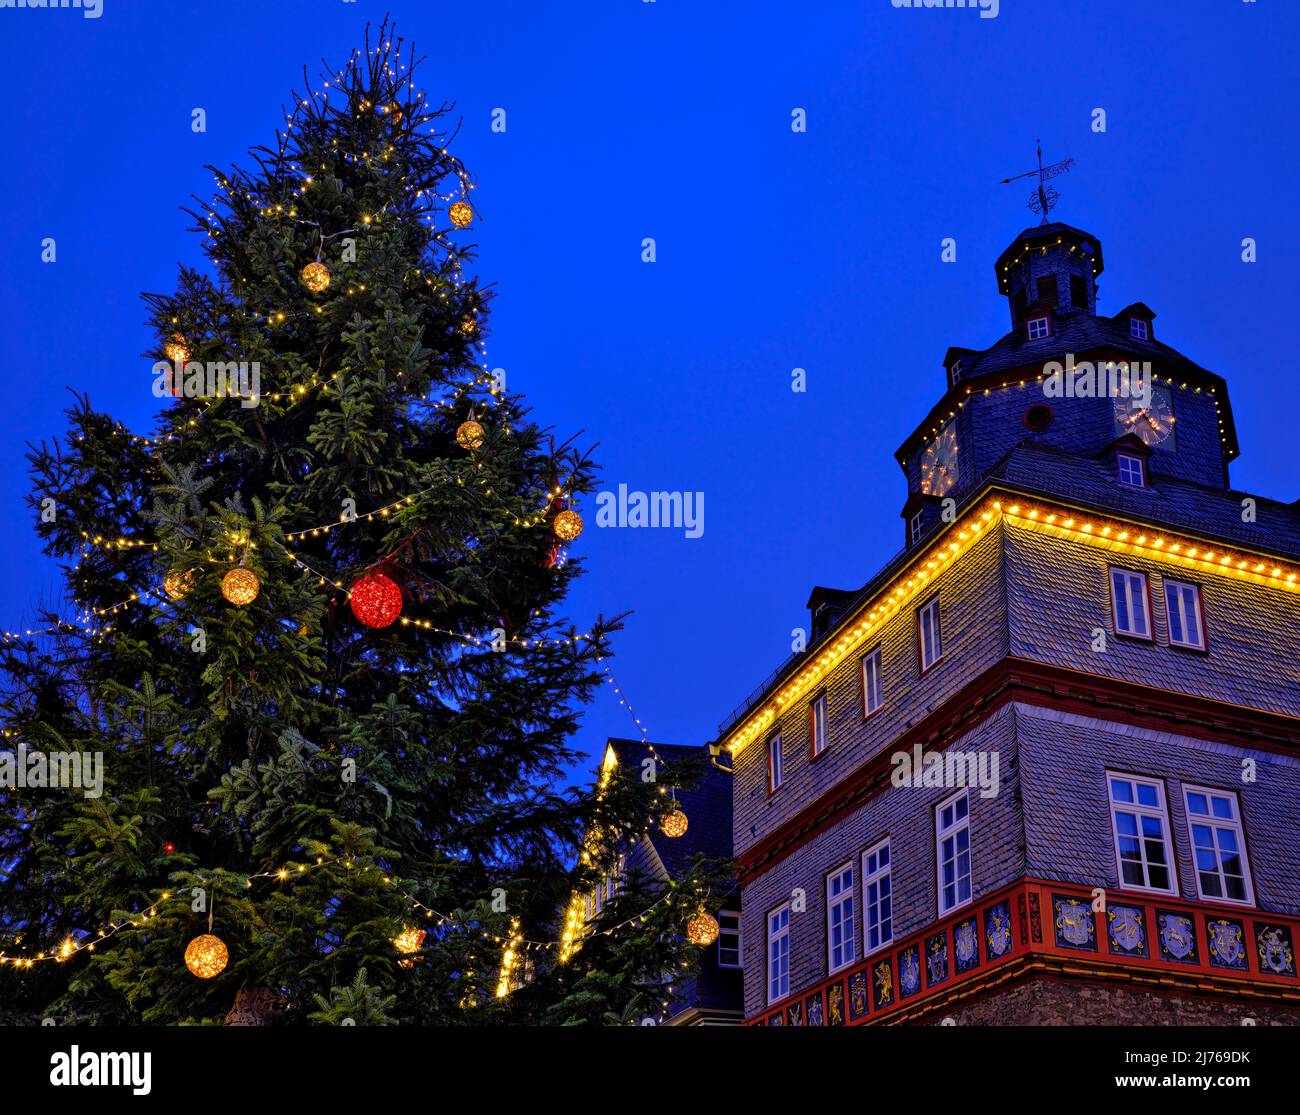 Europe, Germany, Hesse, city of Herborn, historical old town, Christmas, Christmas lights, town hall at market place, Christmas tree Stock Photo